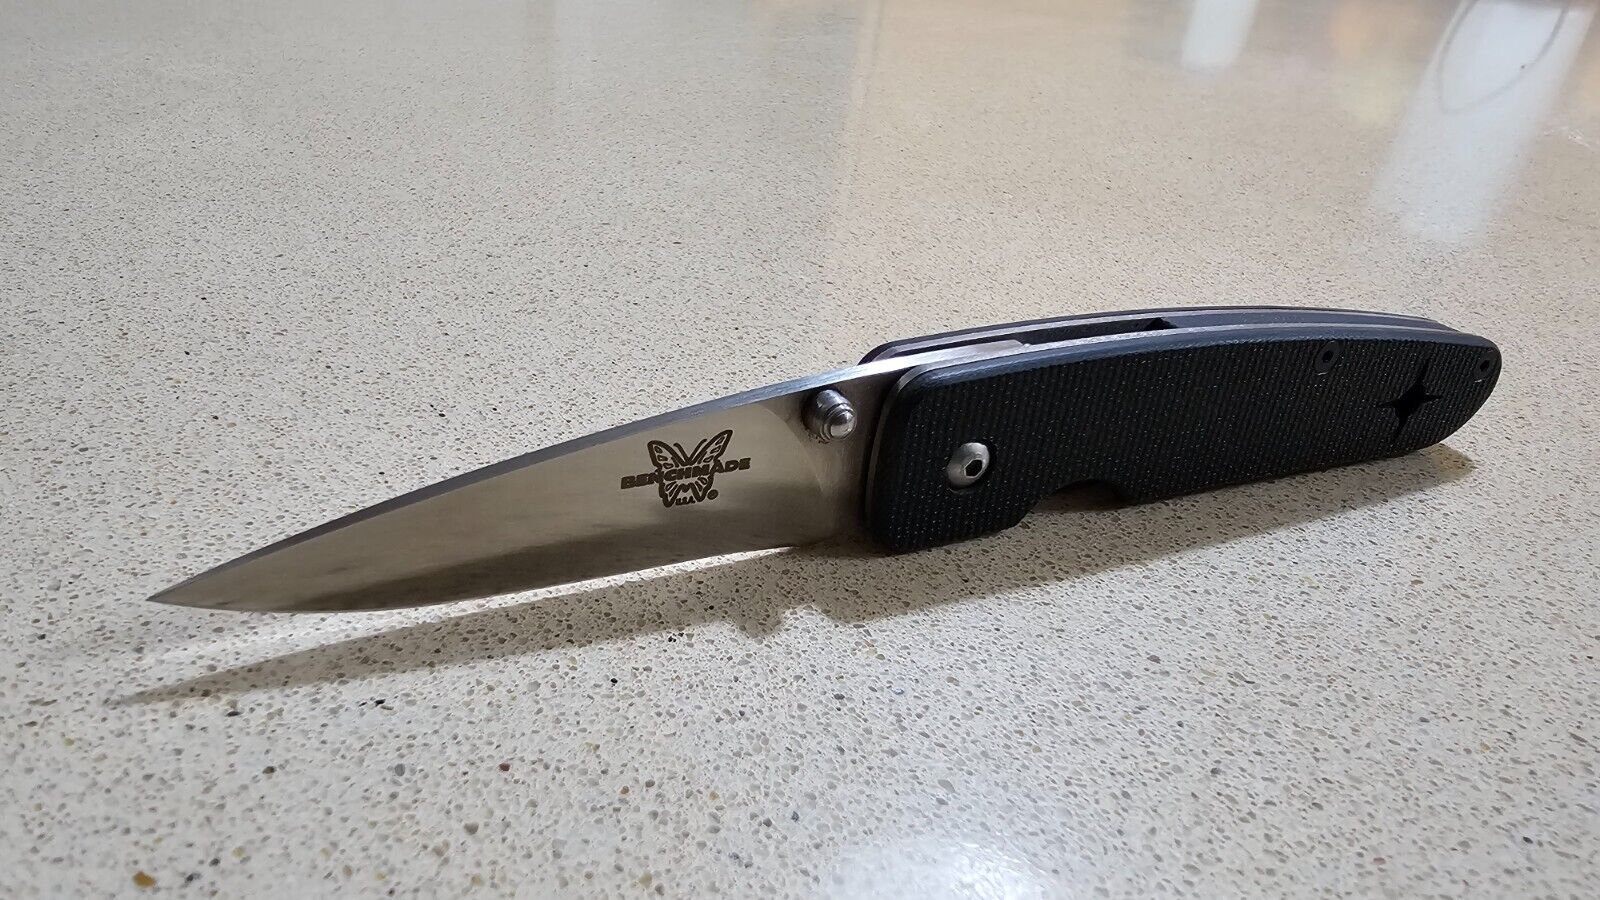 BENCHMADE 856 KNIFE BY MELL PARDUE PRE-PRODUCTION 260 of 500